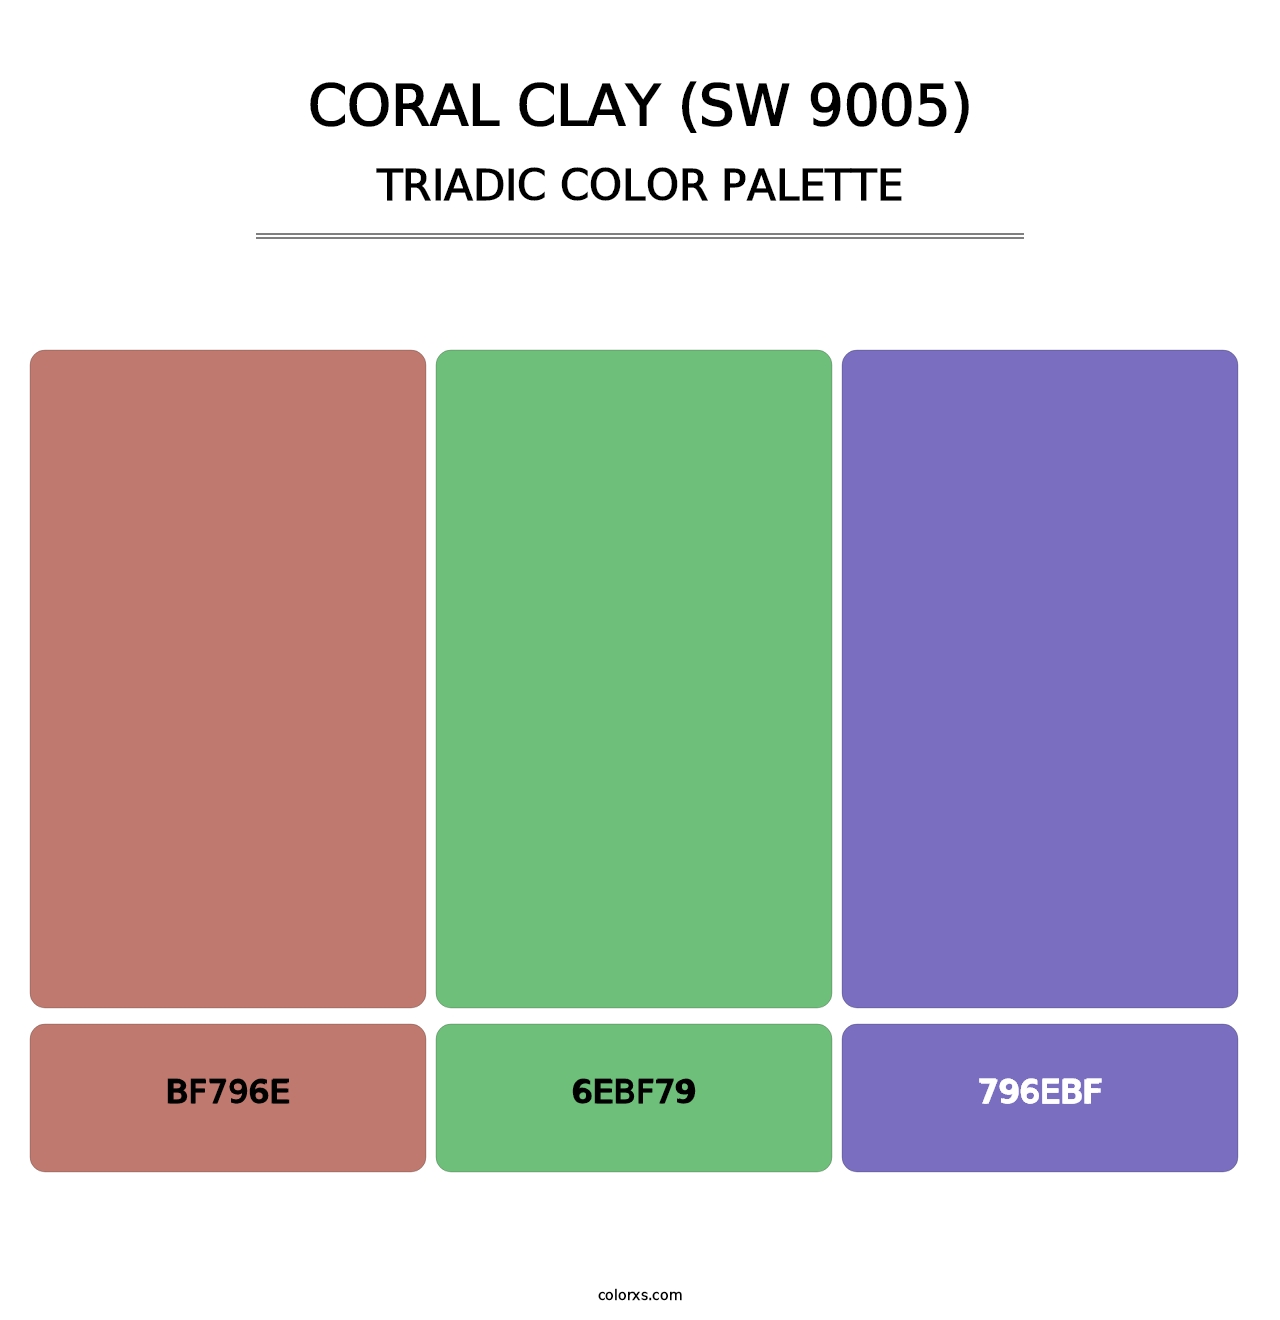 Coral Clay (SW 9005) - Triadic Color Palette